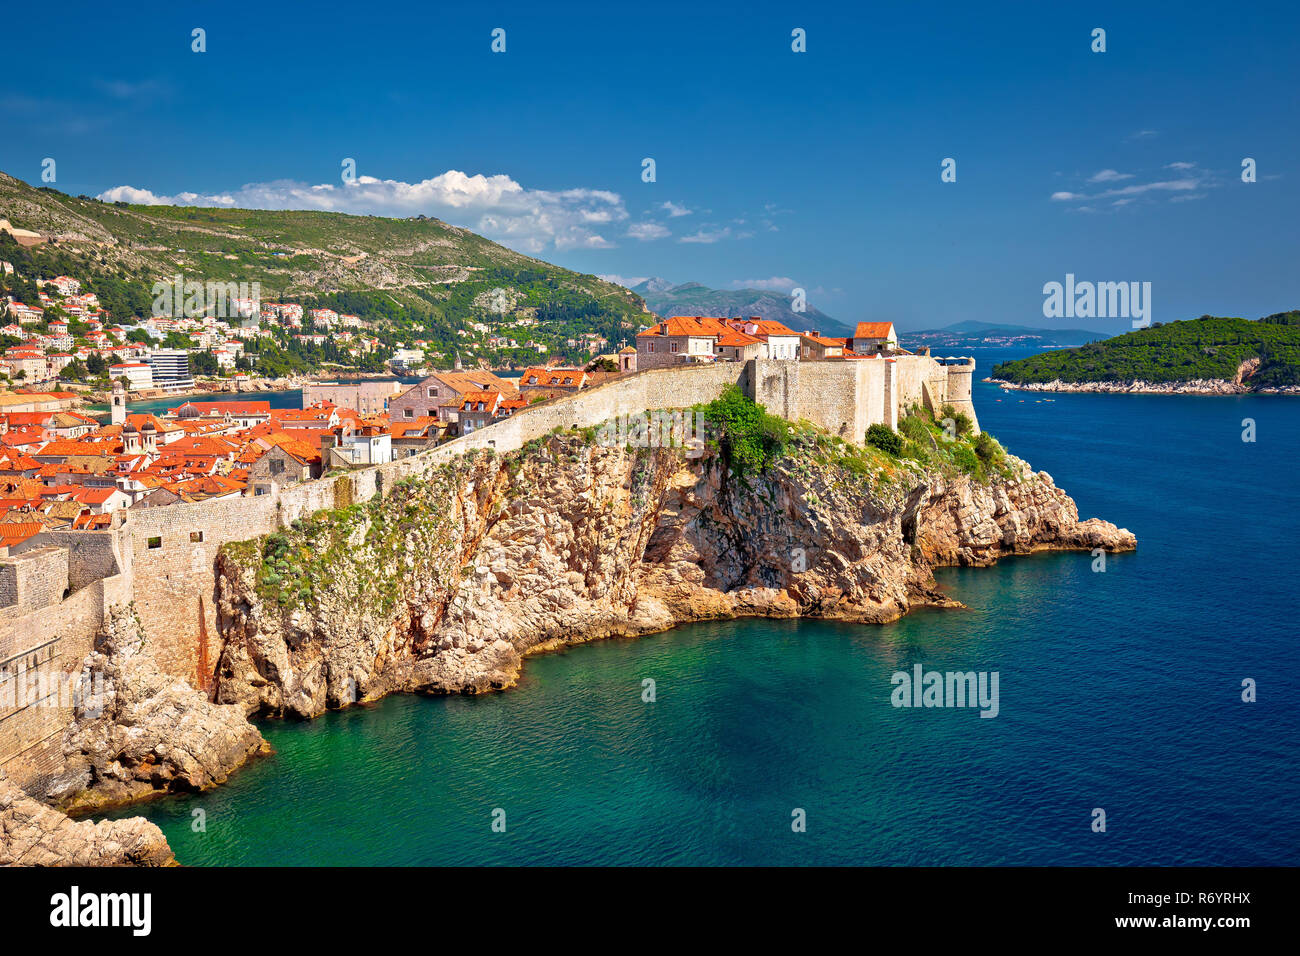 Town of Dubrovnik and stron defence walls view Stock Photo